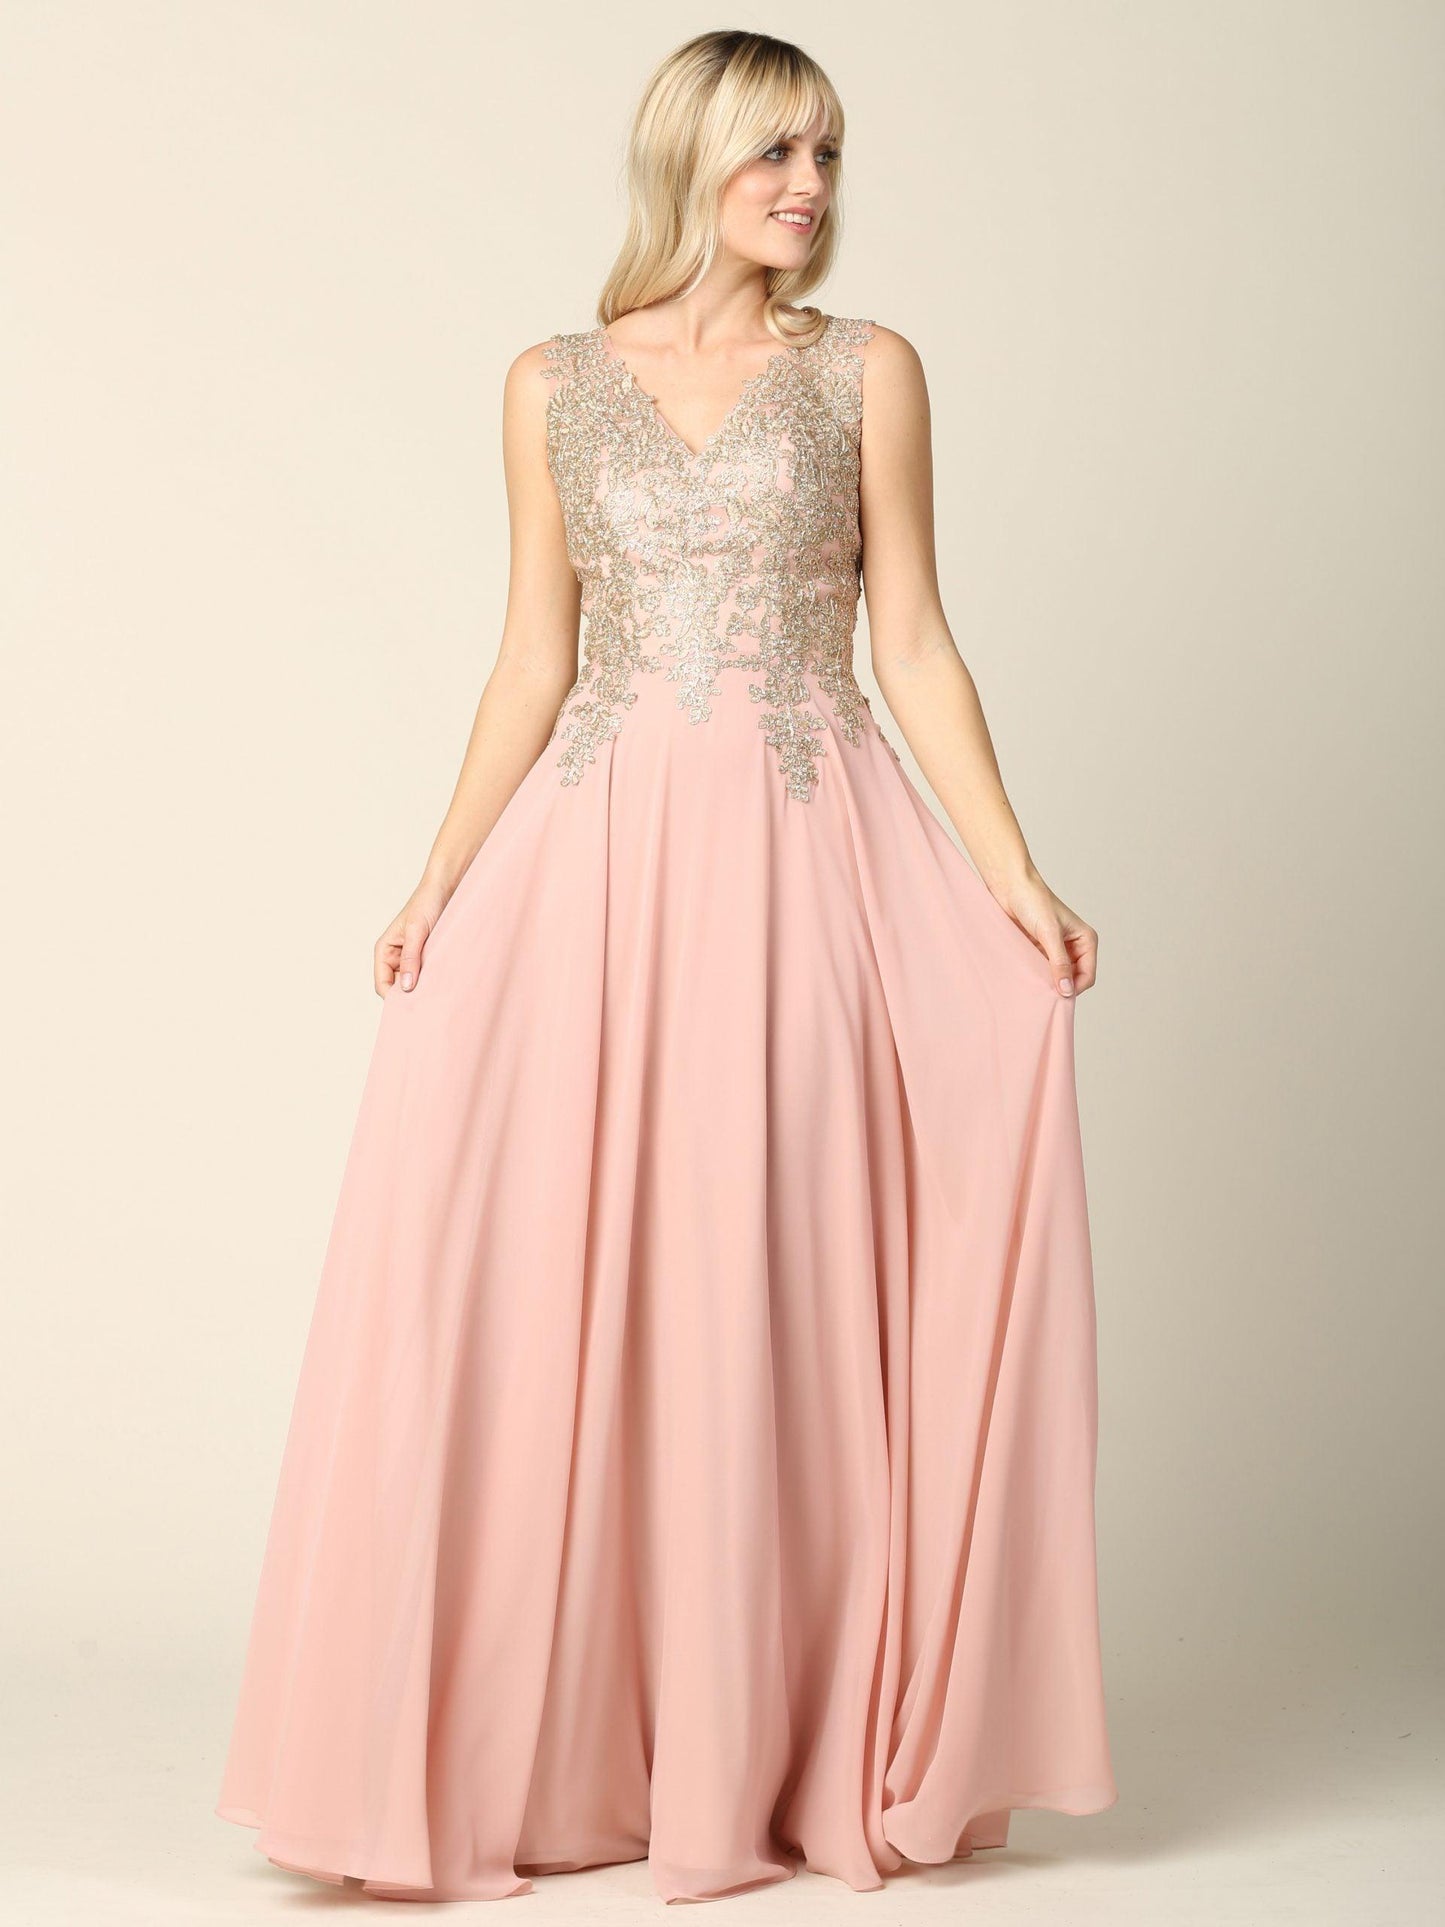 Long Mother of the Bride Chiffon Formal Dress Sale